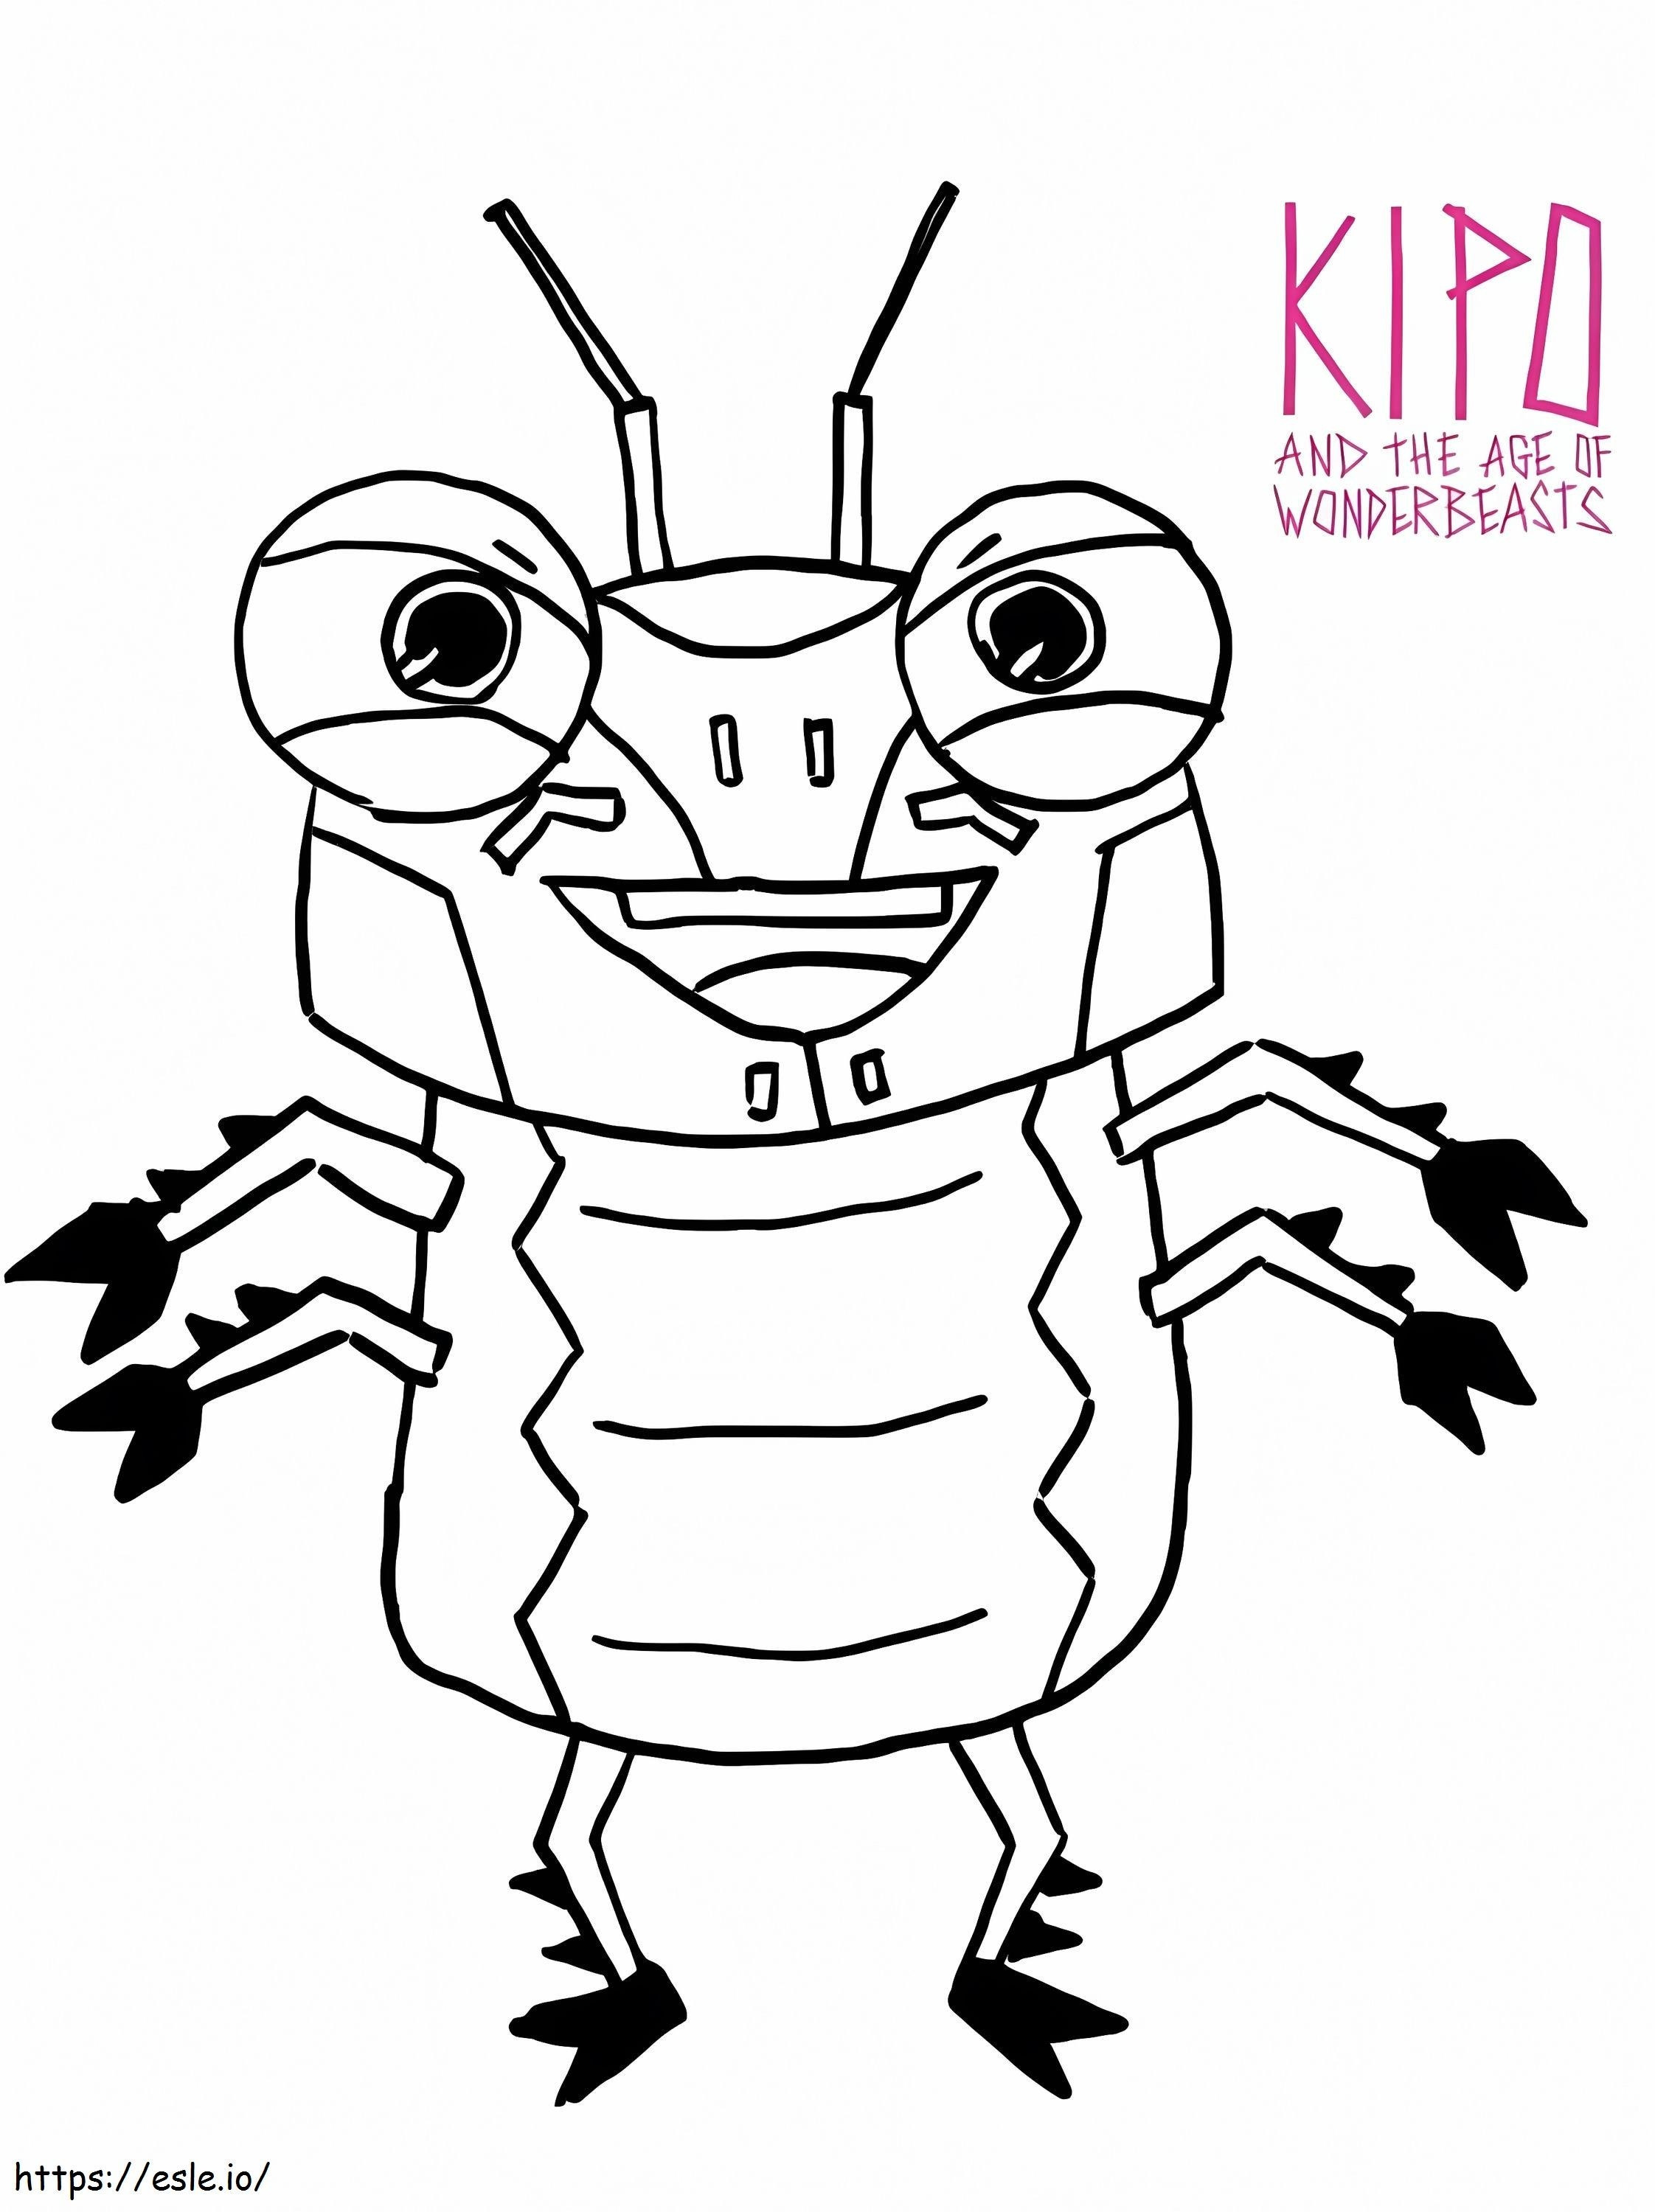 Dave From Kipo And The Age Of Wonderbeasts coloring page